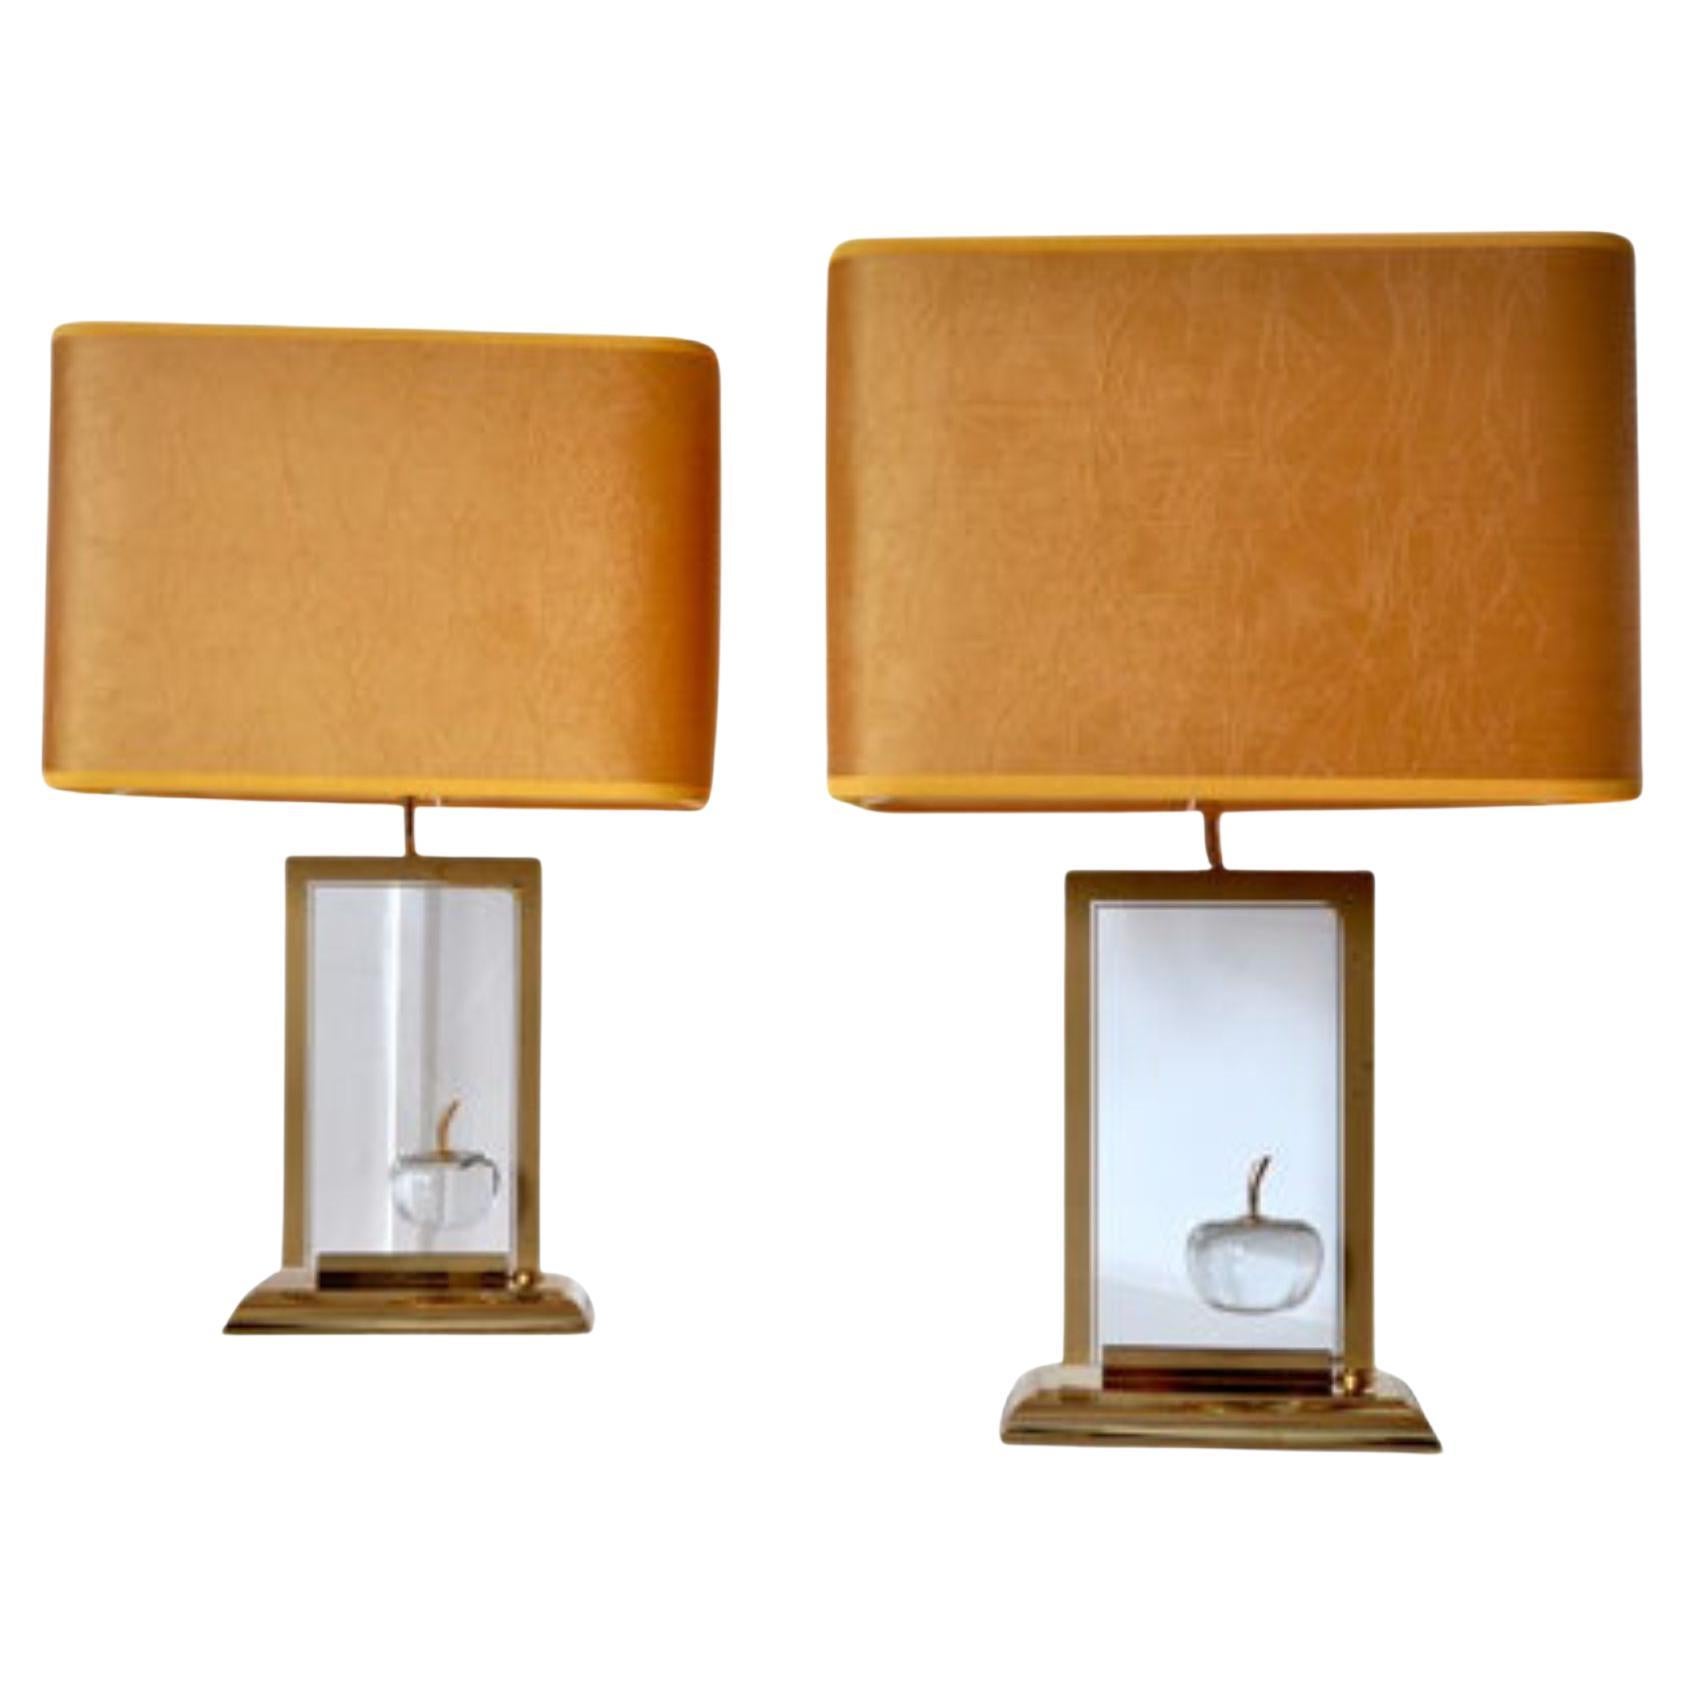 1970s "La Pomme" Table Lamp From Maison Dauphin, France - a Pair For Sale